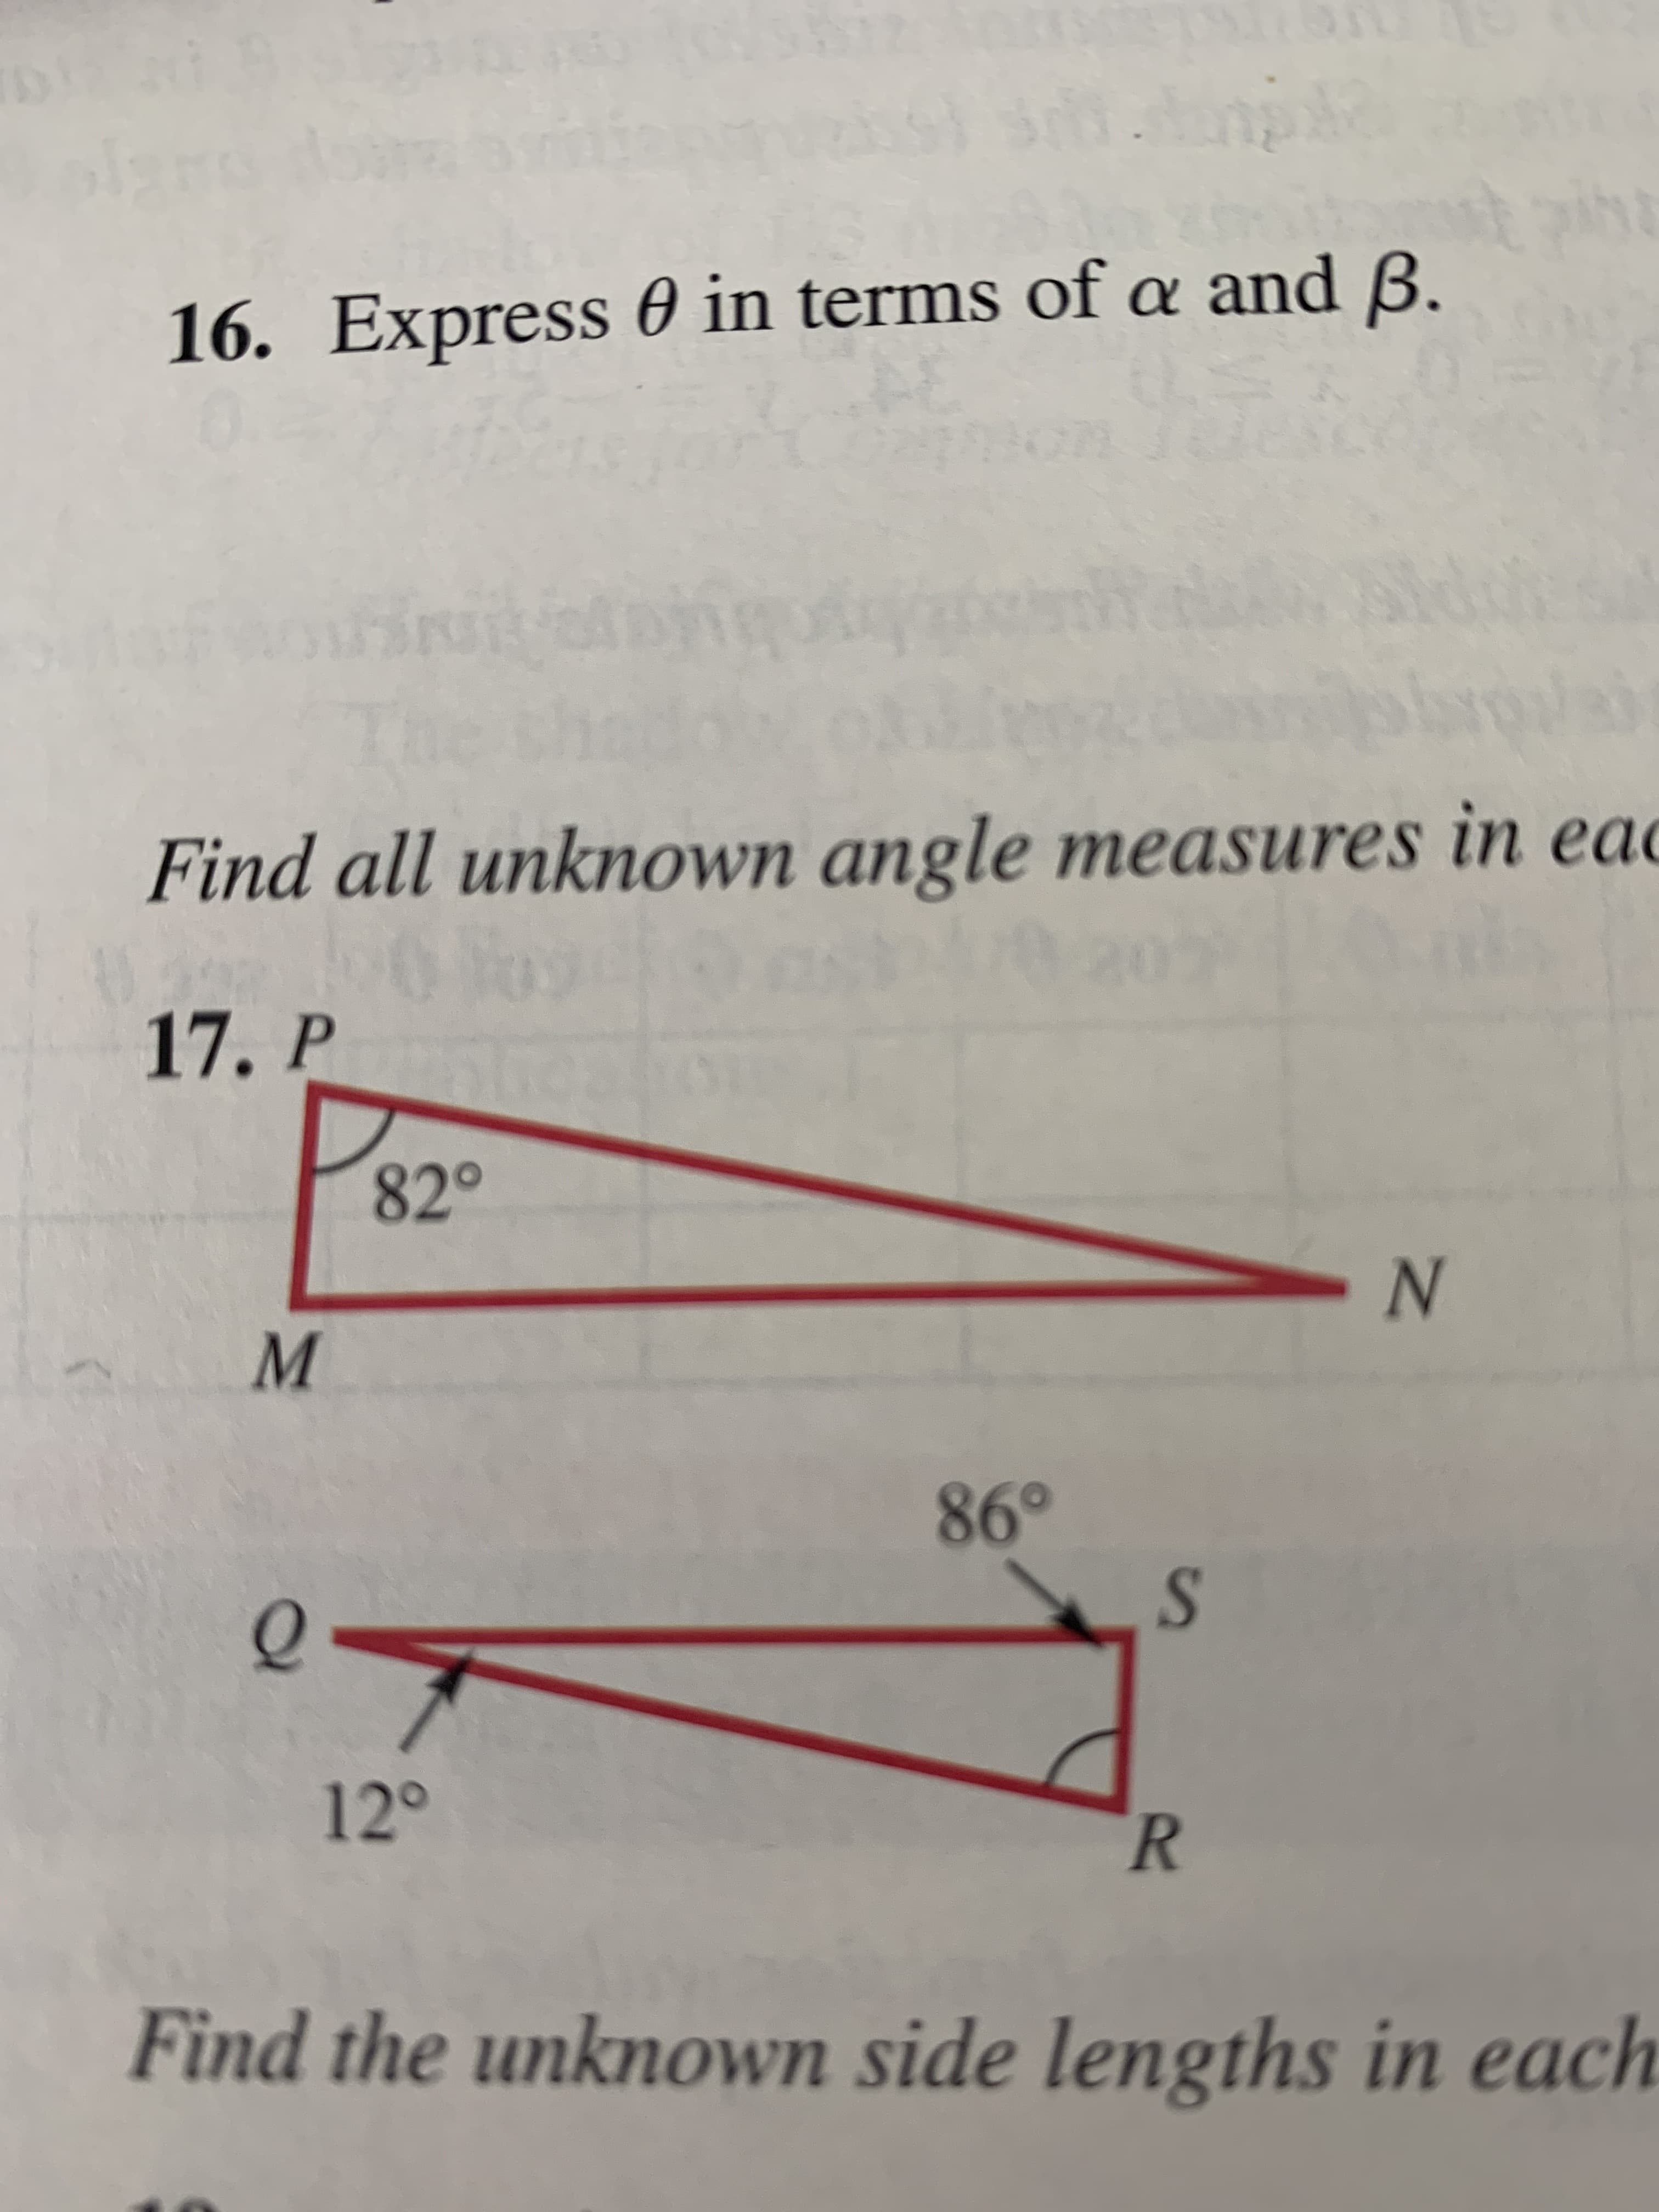 16. Express 0 in terms of a and ß.
Find all unknown angle measures in eac
17. P
82°
86°
12°
Find the unknown side lengths in each
